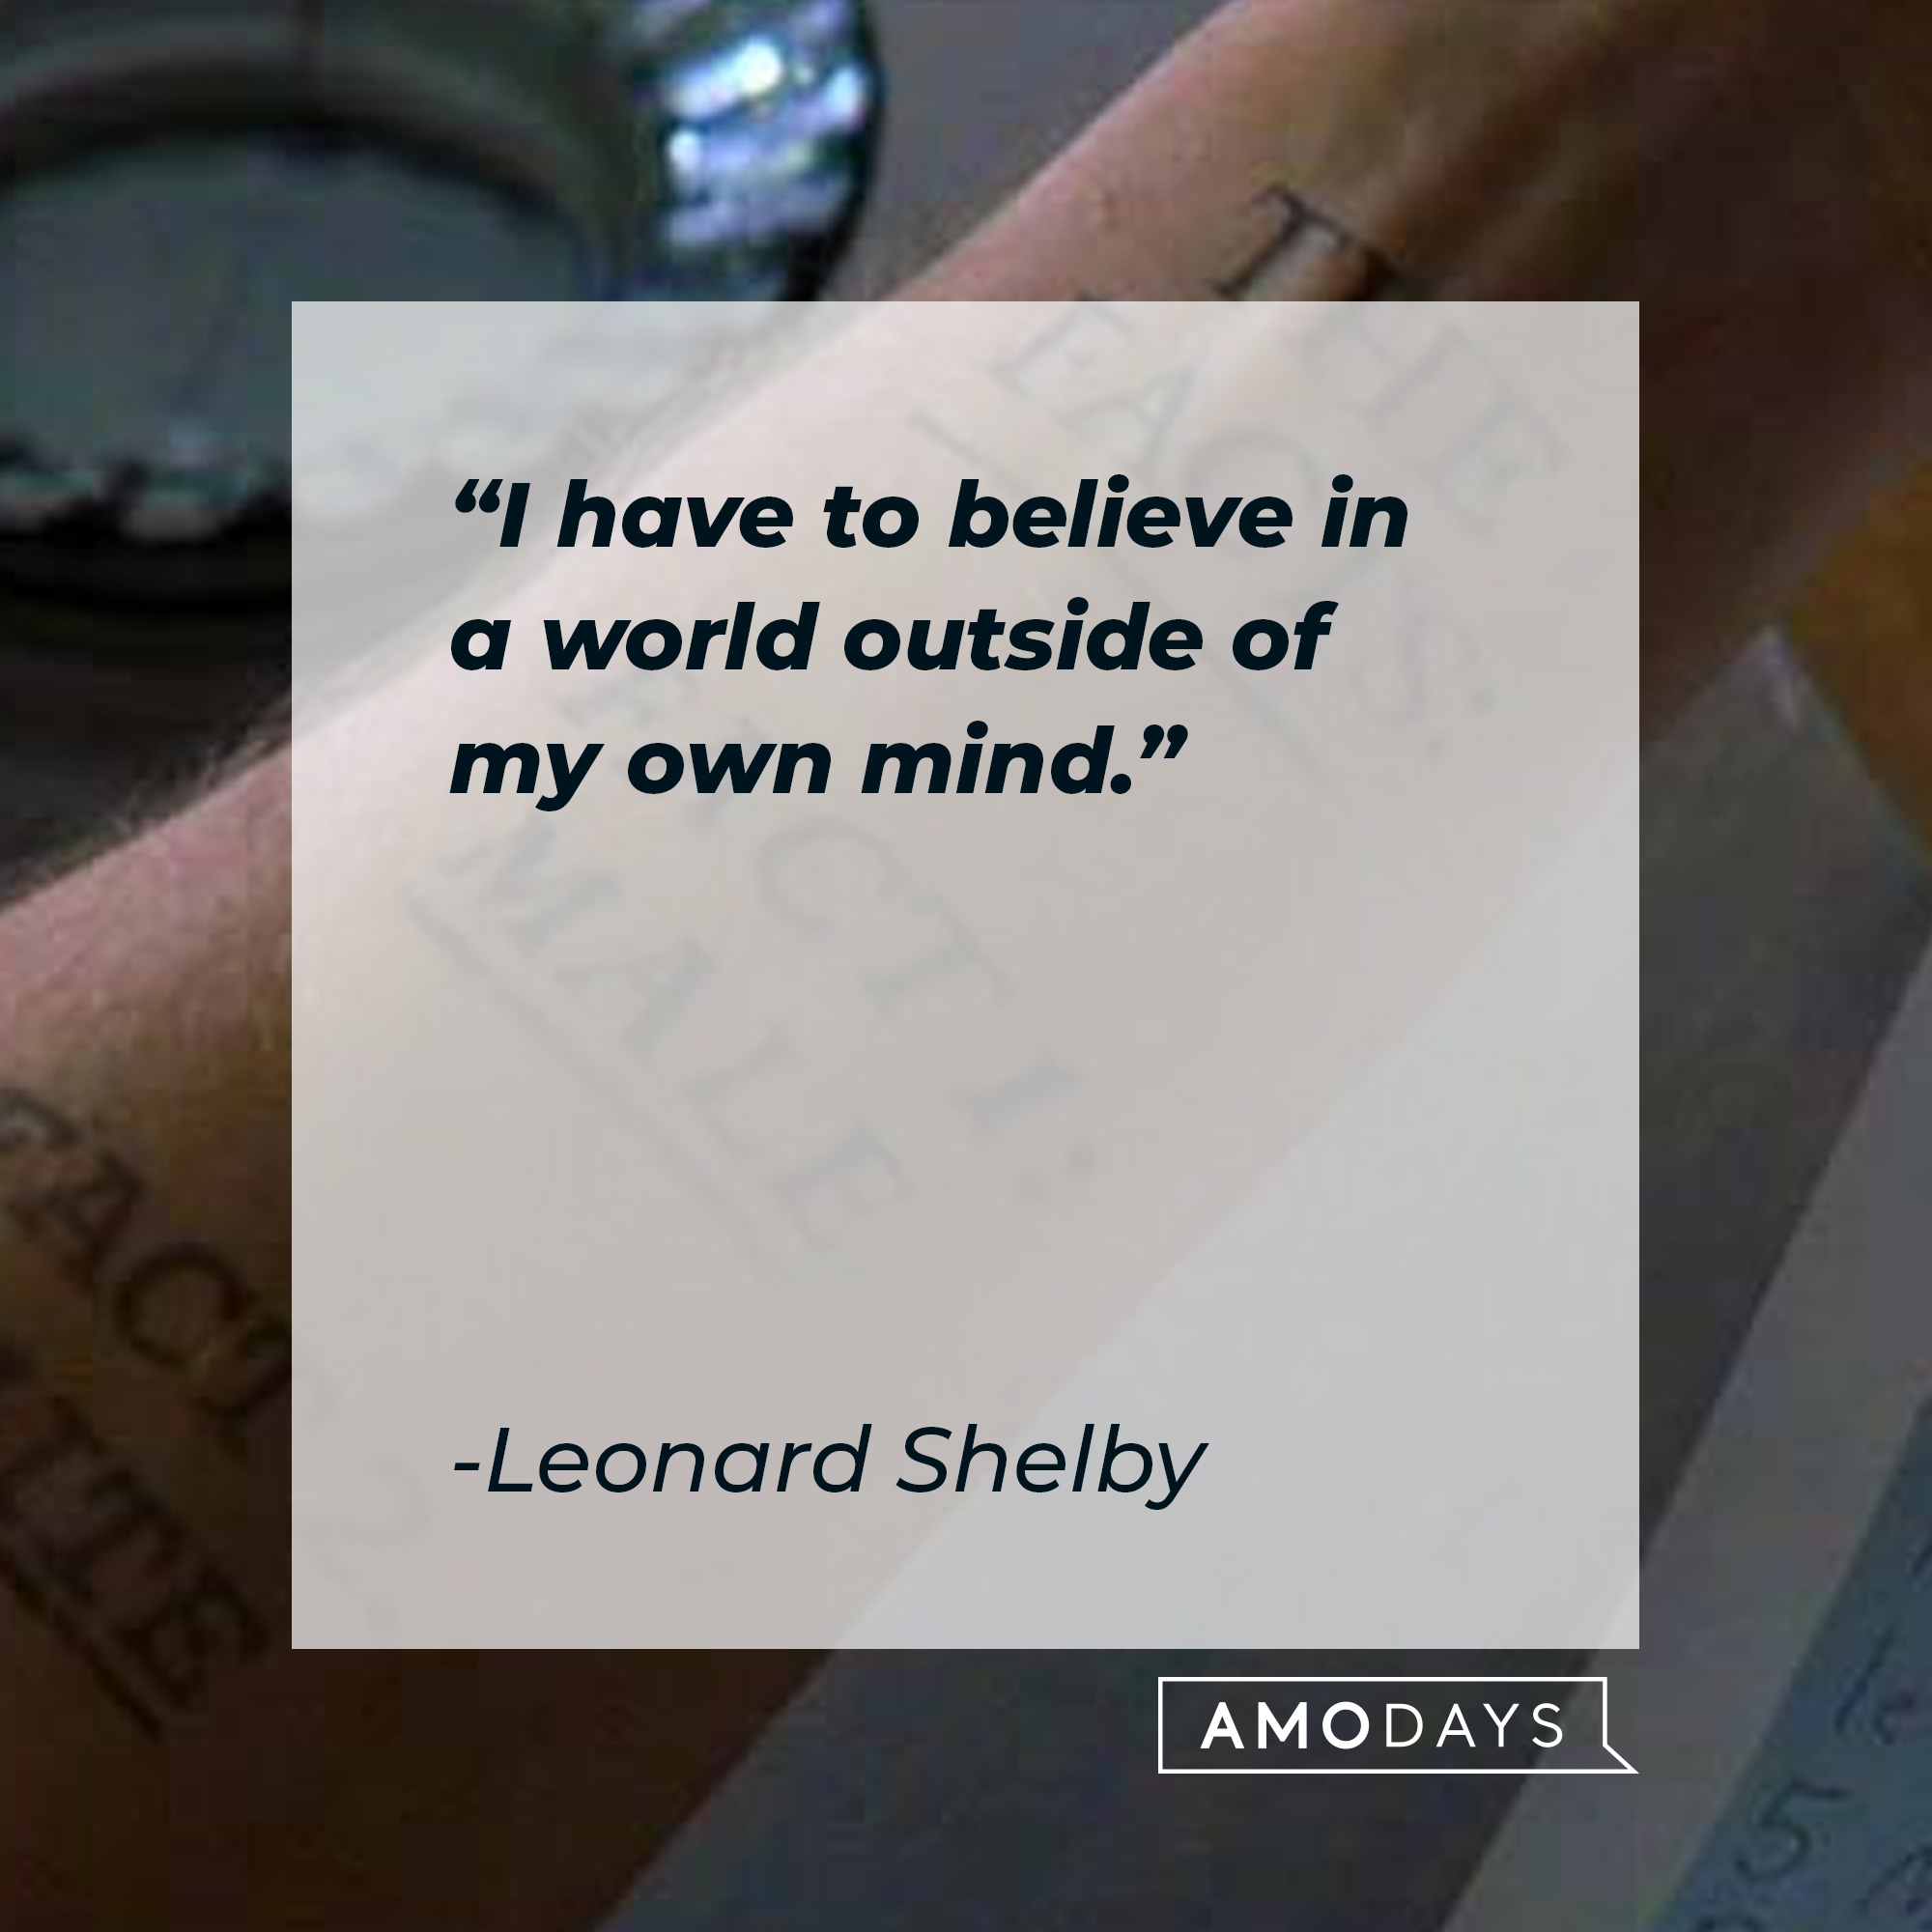 Leonard Shelby's quote: "I have to believe in a world outside of my own mind." | Source: facebook.com/MementoOfficial